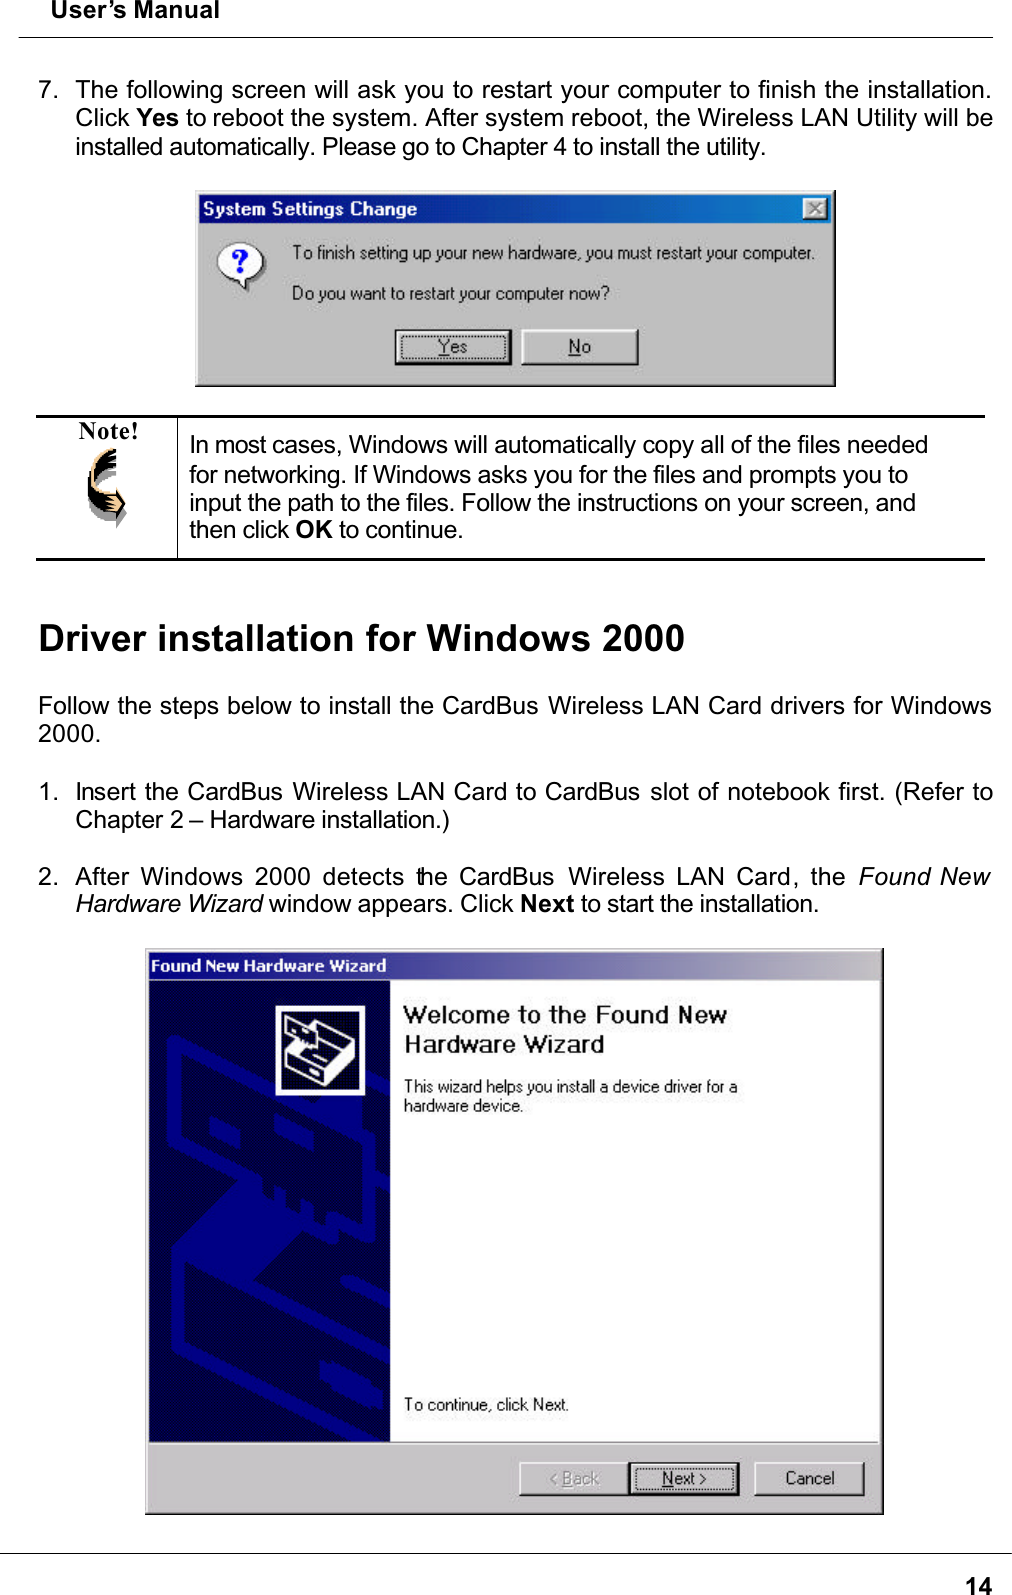  User’s Manual147. The following screen will ask you to restart your computer to finish the installation. Click Yes to reboot the system. After system reboot, the Wireless LAN Utility will be installed automatically. Please go to Chapter 4 to install the utility.Note! In most cases, Windows will automatically copy all of the files needed for networking. If Windows asks you for the files and prompts you to input the path to the files. Follow the instructions on your screen, and then click OK to continue.Driver installation for Windows 2000Follow the steps below to install the CardBus Wireless LAN Card drivers for Windows 2000.1. Insert the CardBus Wireless LAN Card to CardBus slot of notebook first. (Refer to Chapter 2 – Hardware installation.)2. After Windows 2000 detects the CardBus   Wireless LAN Card, the Found New Hardware Wizard window appears. Click Next to start the installation.